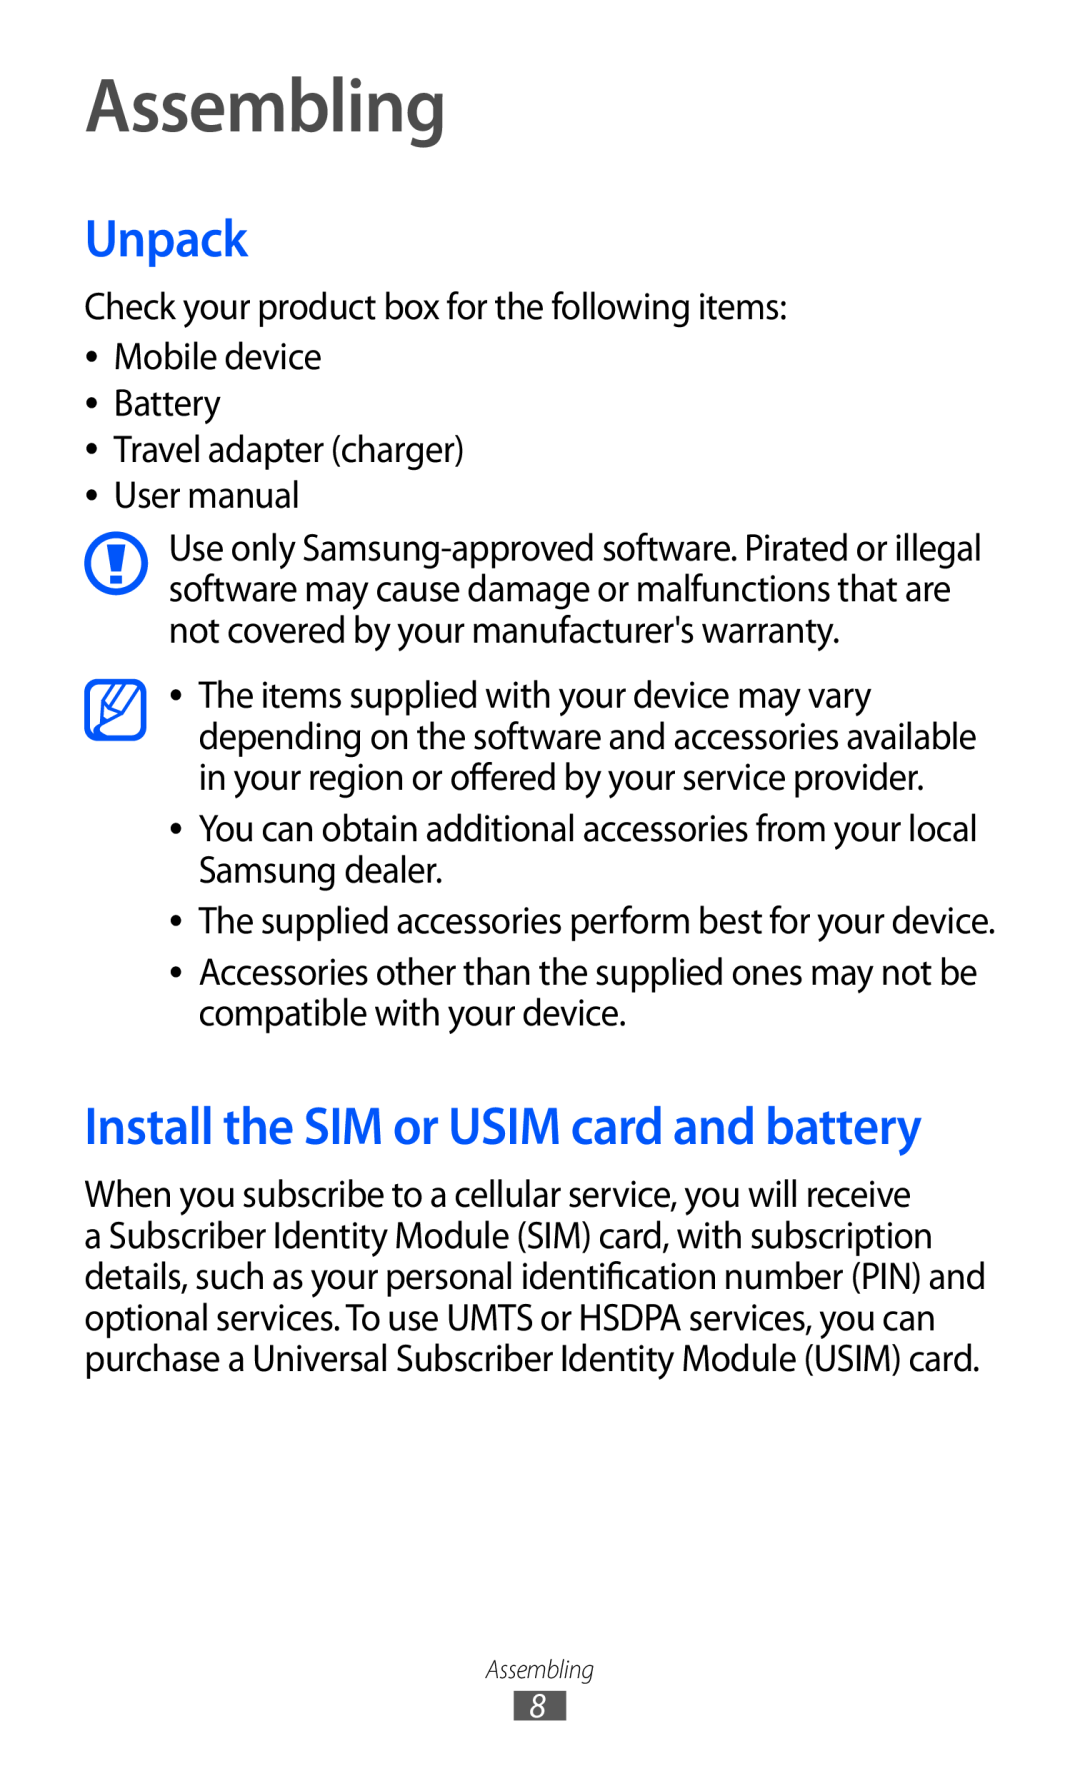 Samsung GT-C6712LKATHR Assembling, Unpack, Install the SIM or USIM card and battery, Travel adapter charger User manual 